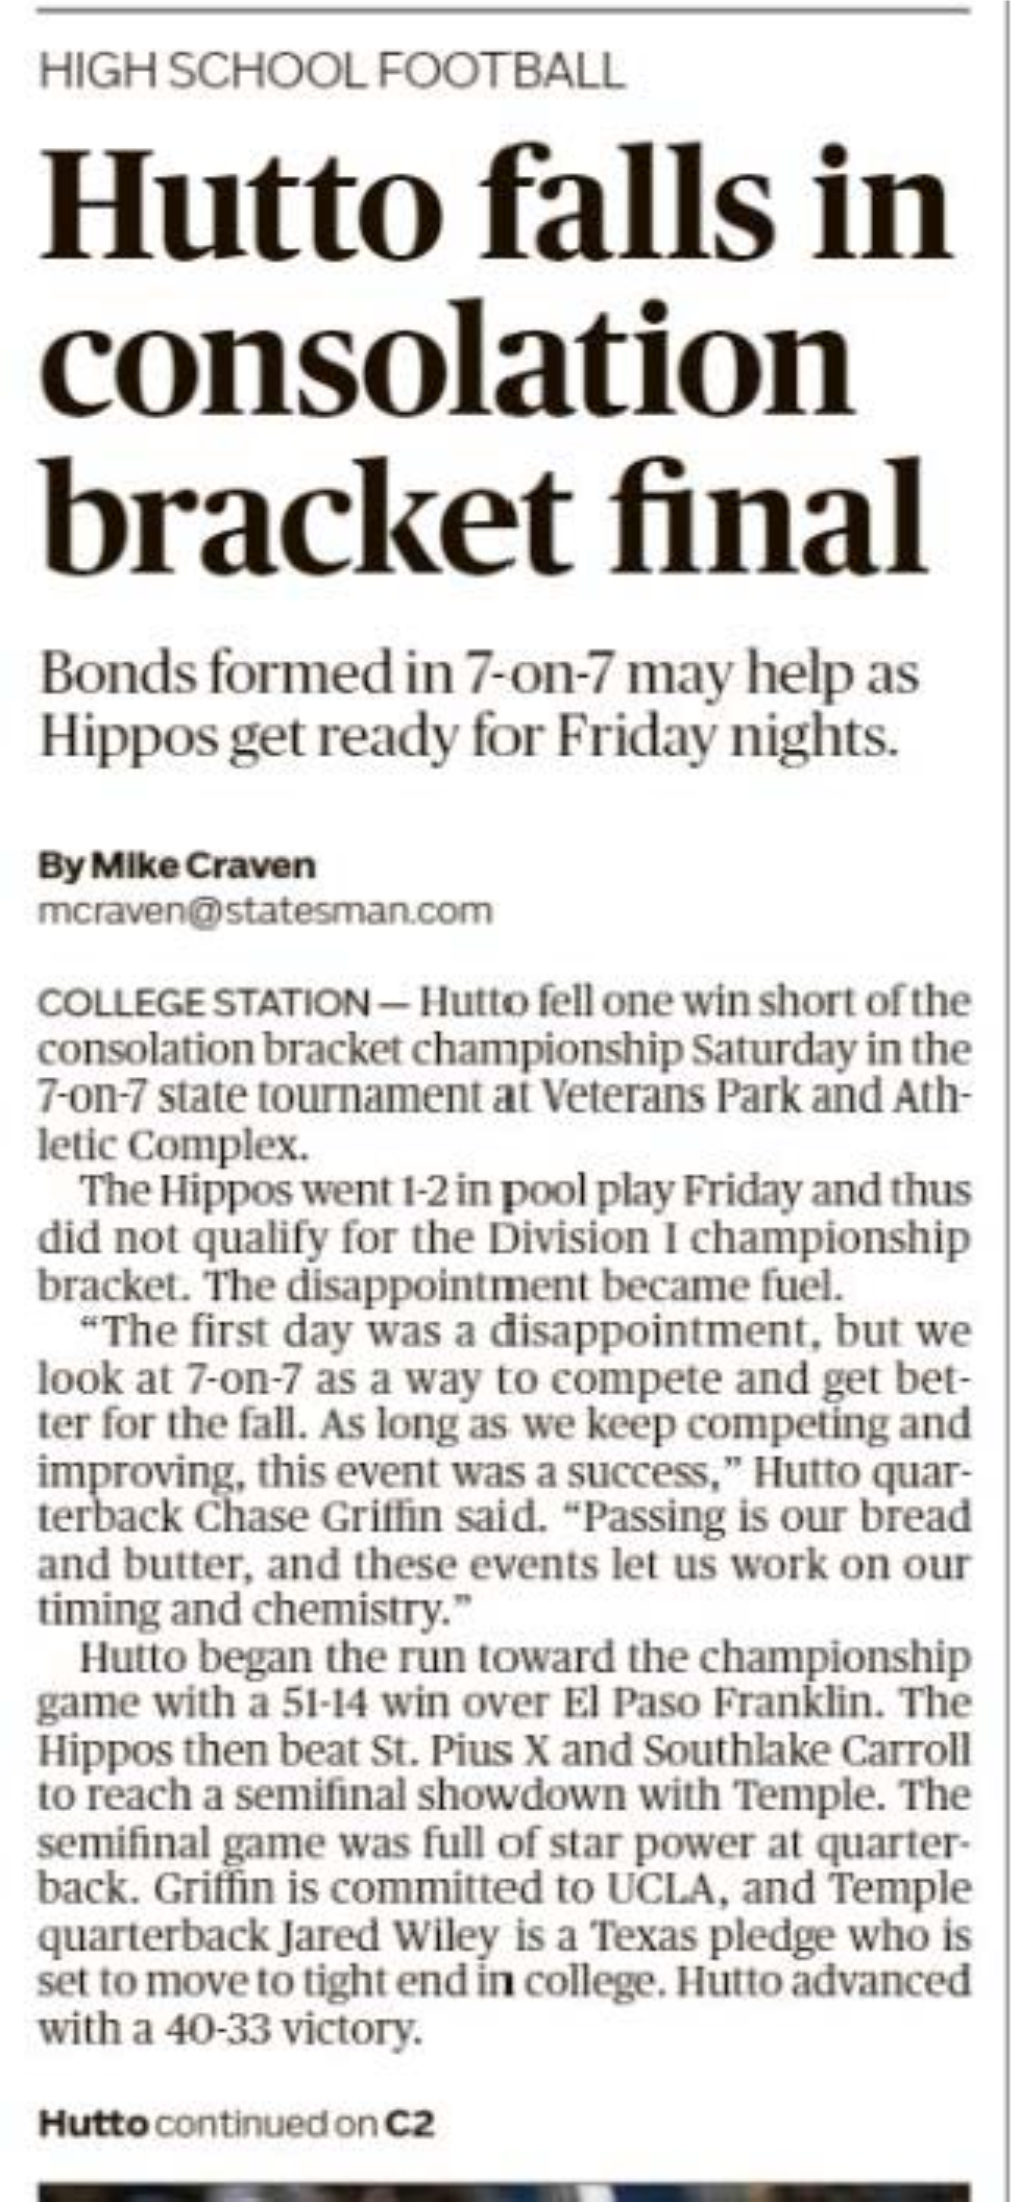 Hutto Falls in Consolation Bracl{Et Final Bonds Formed in 7-On-7 May Help As Hippos Get Ready for Friday Nights